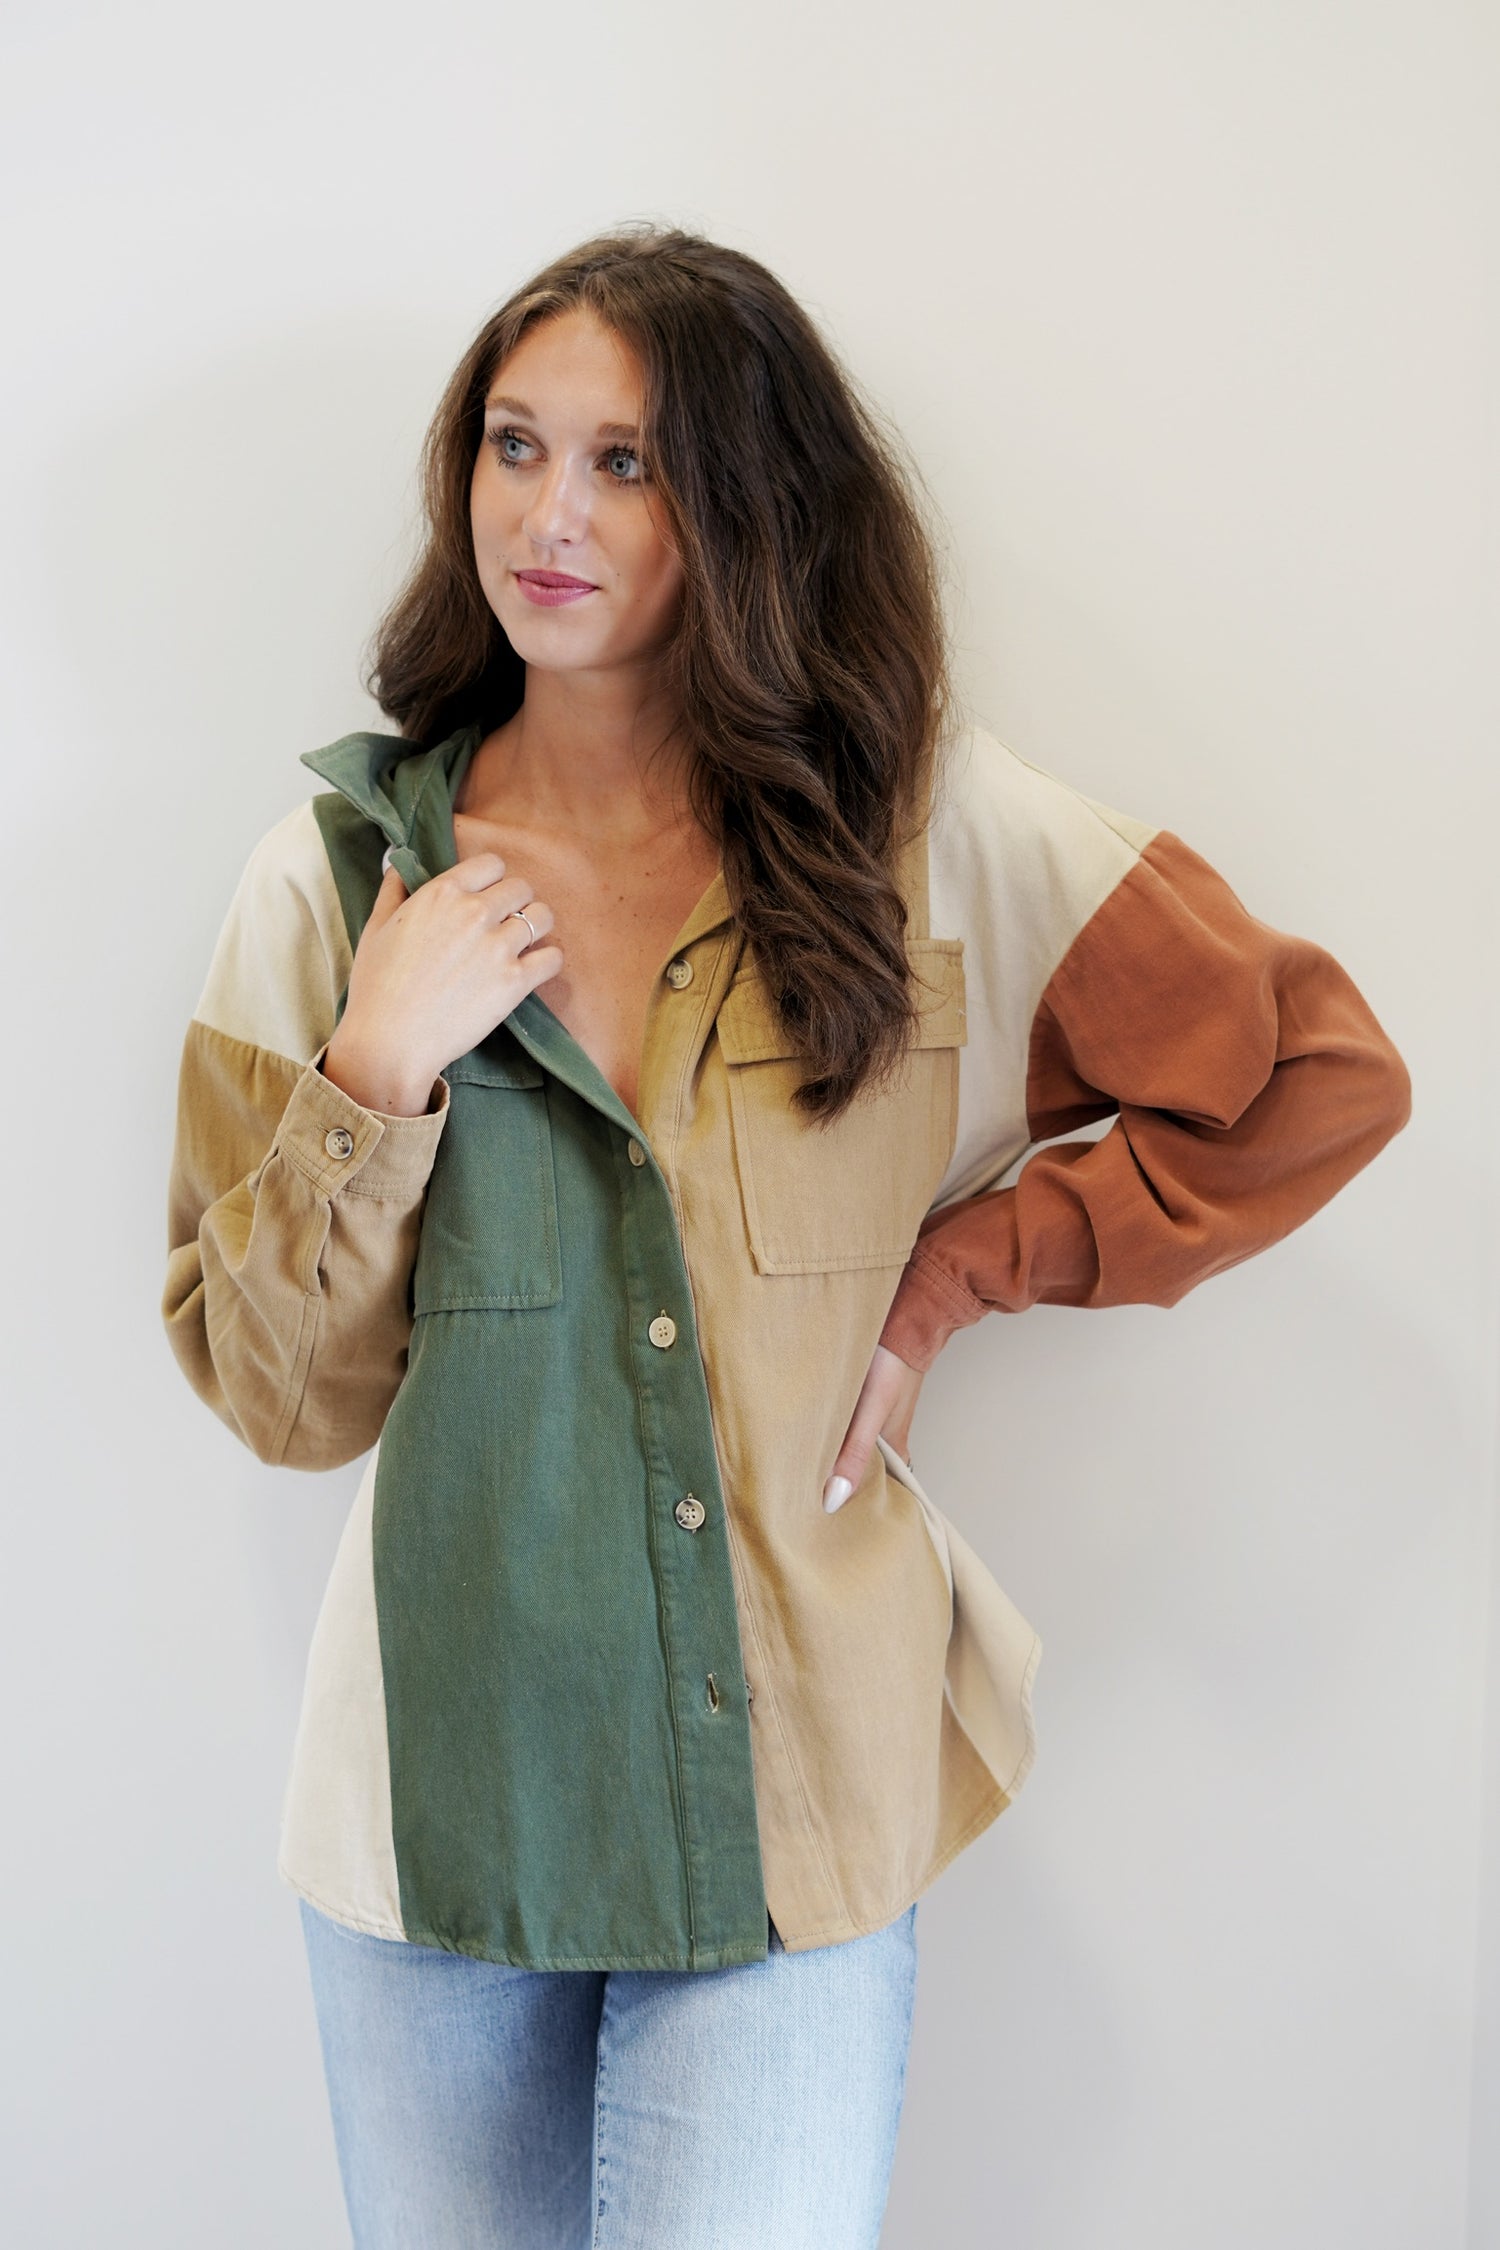 Amber Color Block Shacket Collard Neck Button up  Color: Hunter Green Mixed 100% Cotton Hand Wash Cold,Do Not Wring Or Twist, Use Only on Chlorine Bleach, Line Dry, Low Iron If Needed, May Be Dry Cleaned Model is wearing size: Small